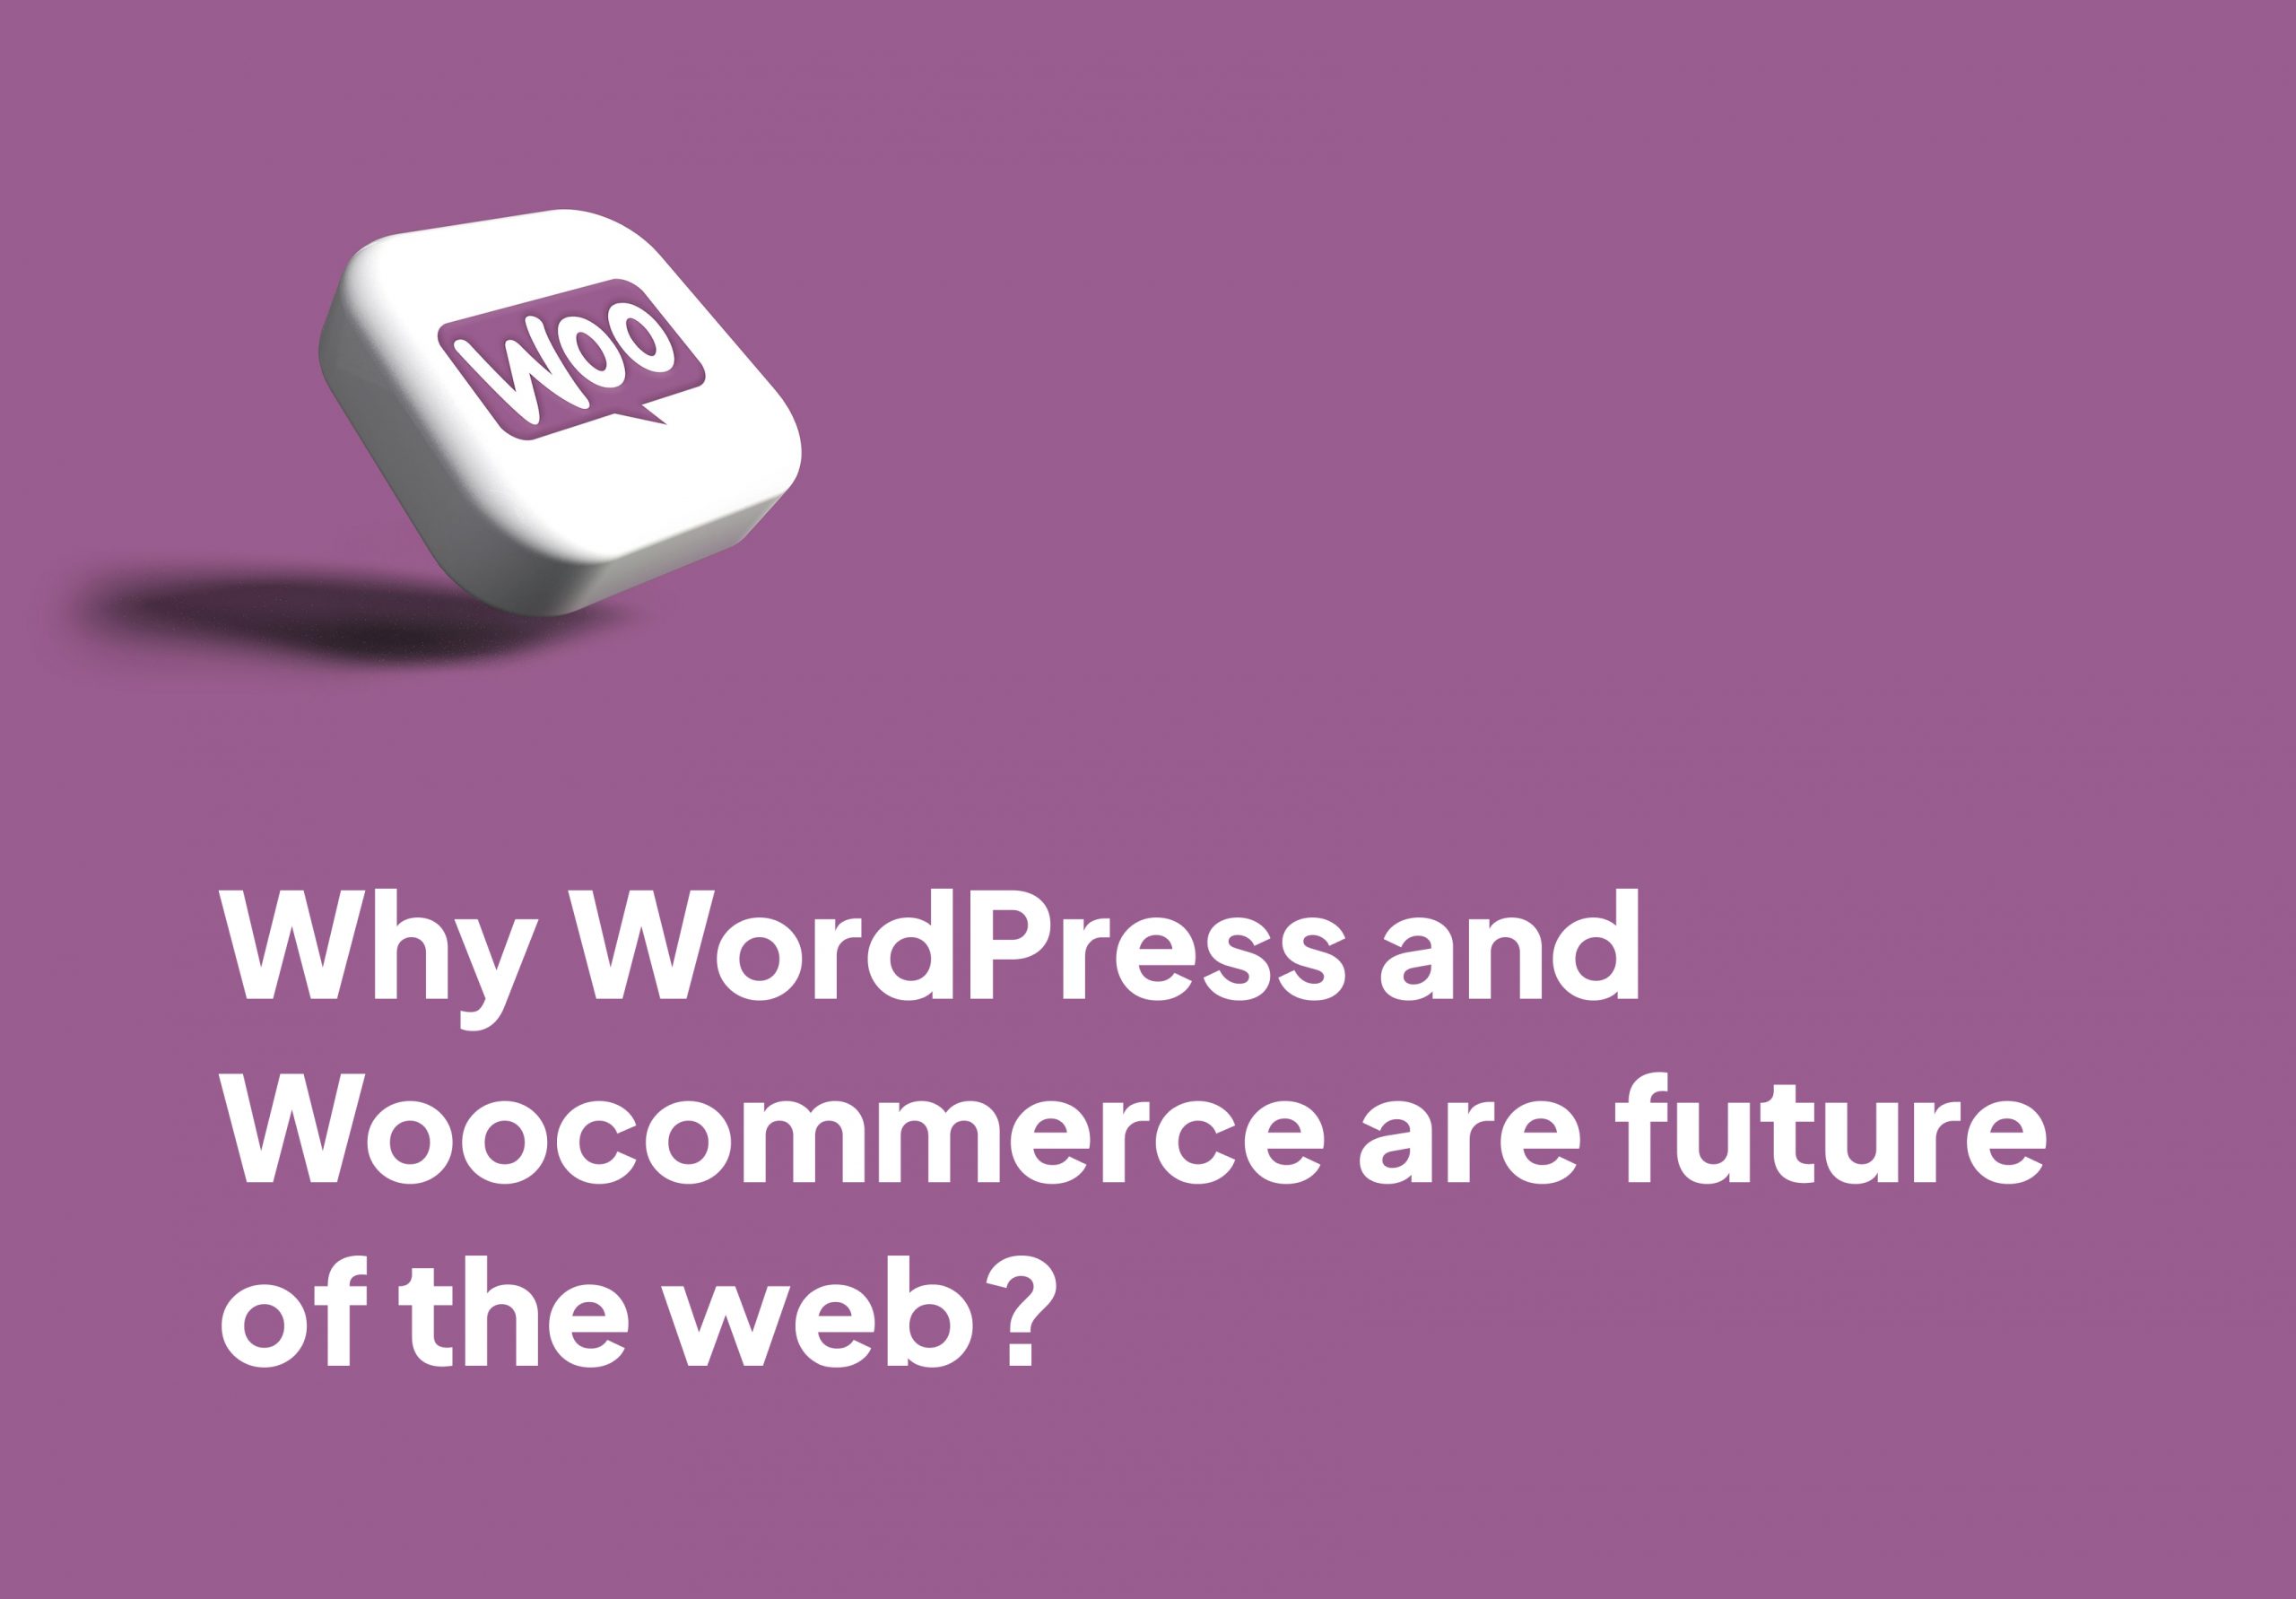 Why WordPress and Woocommerce are future of the web?